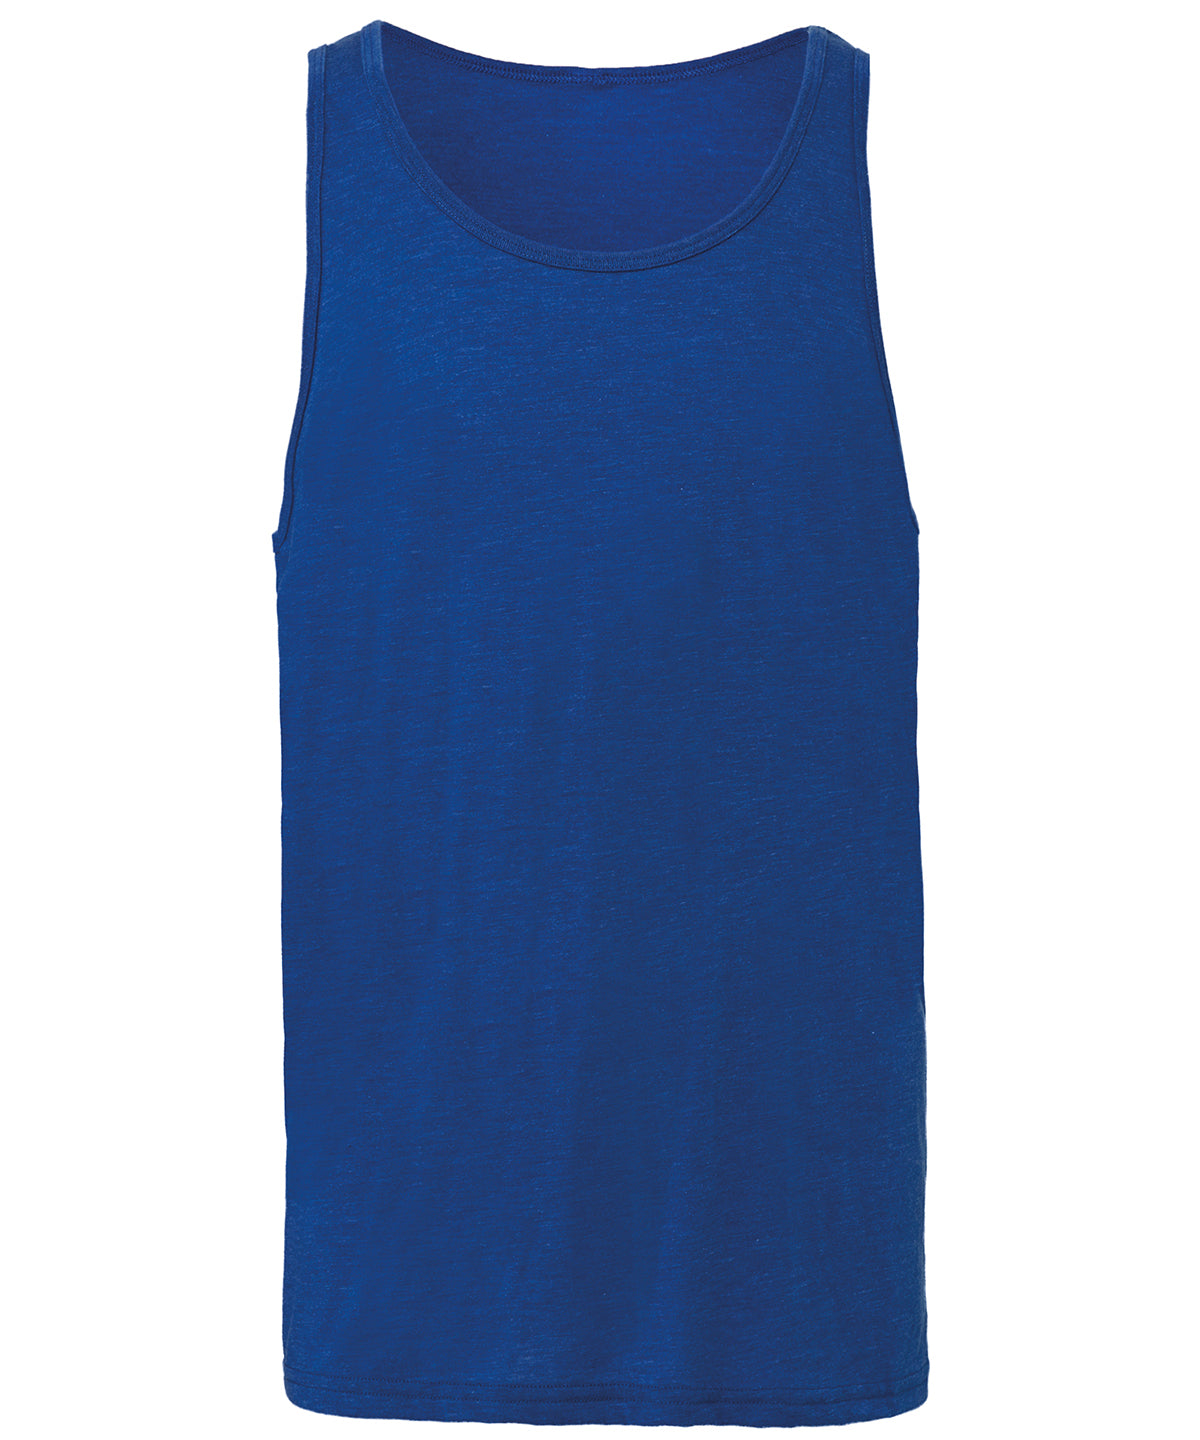 Personalised Vests - Mid Blue Bella Canvas Unisex Jersey tank top